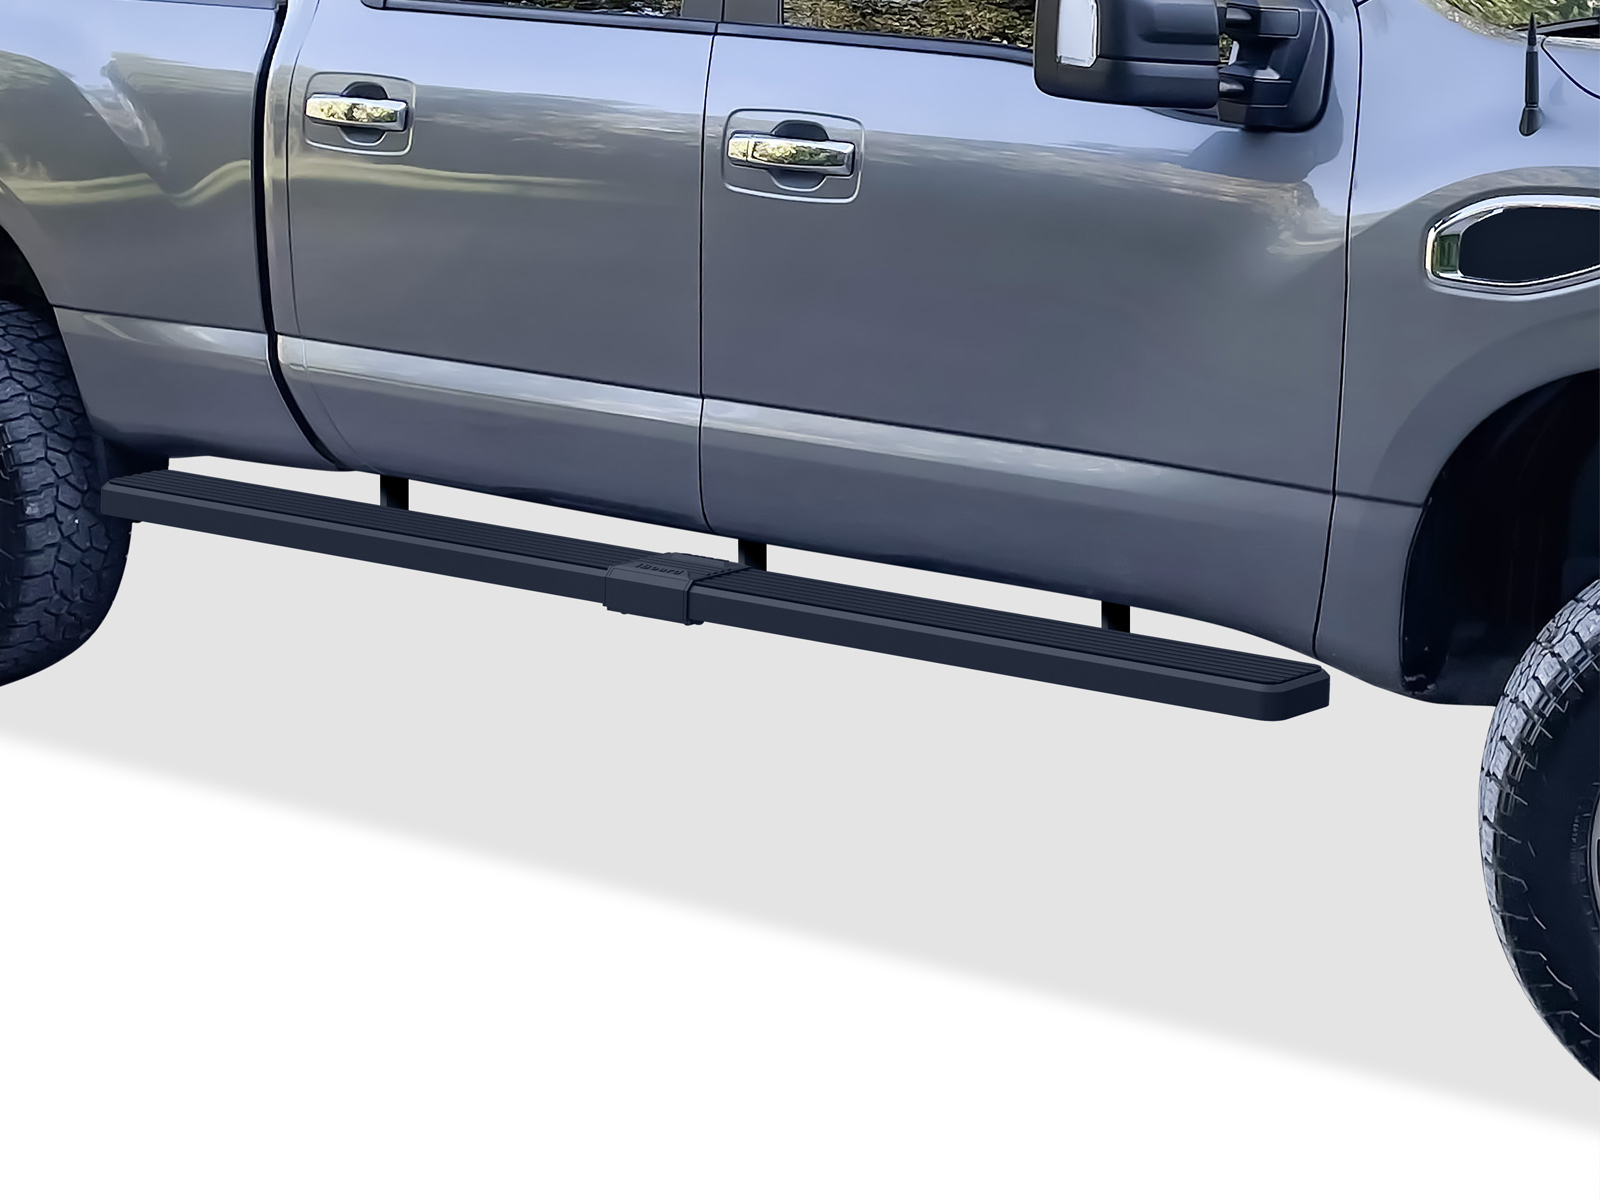 2004-2024 Nissan Titan Crew Cab (Exl. 2016 Models) 2016-2024 Nissan Titan XD Crew Cab|6.5 ft Bed Both Sides iStep W2W 5 Inch Stainless Steel